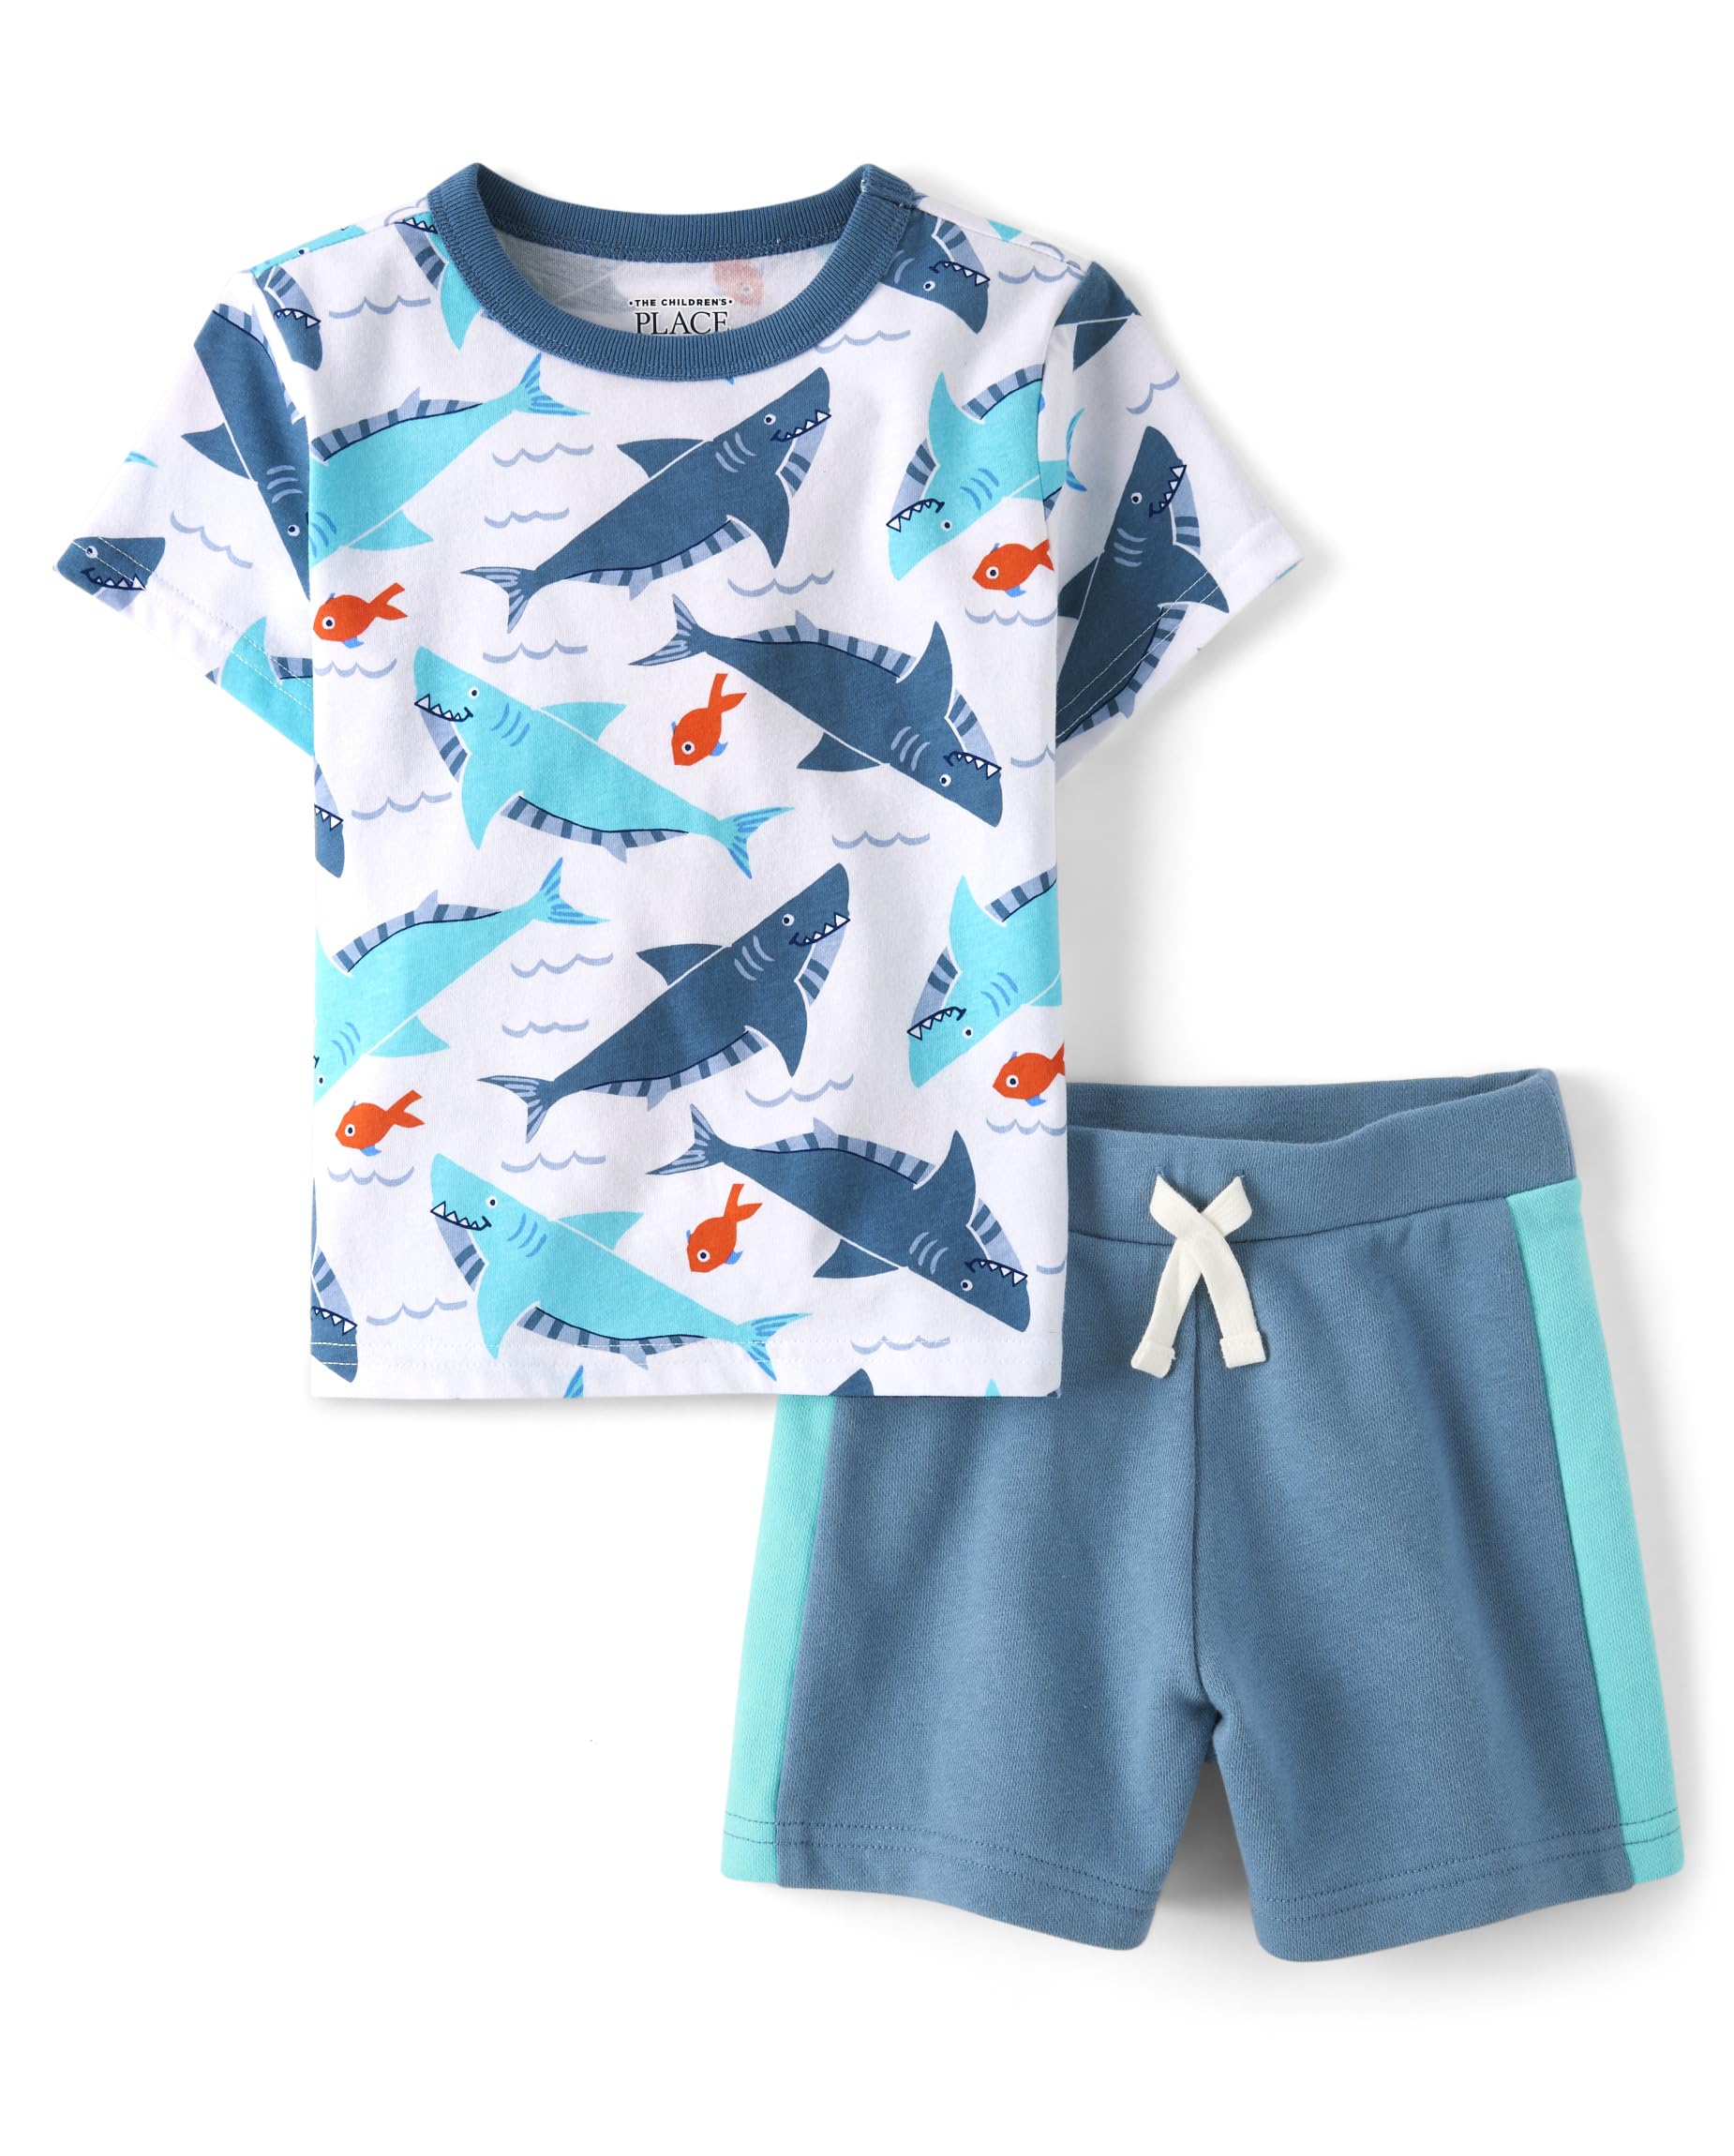 The Children's Place Baby Boy's and Toddler Sleeve Shirt and Shorts 2 Piece